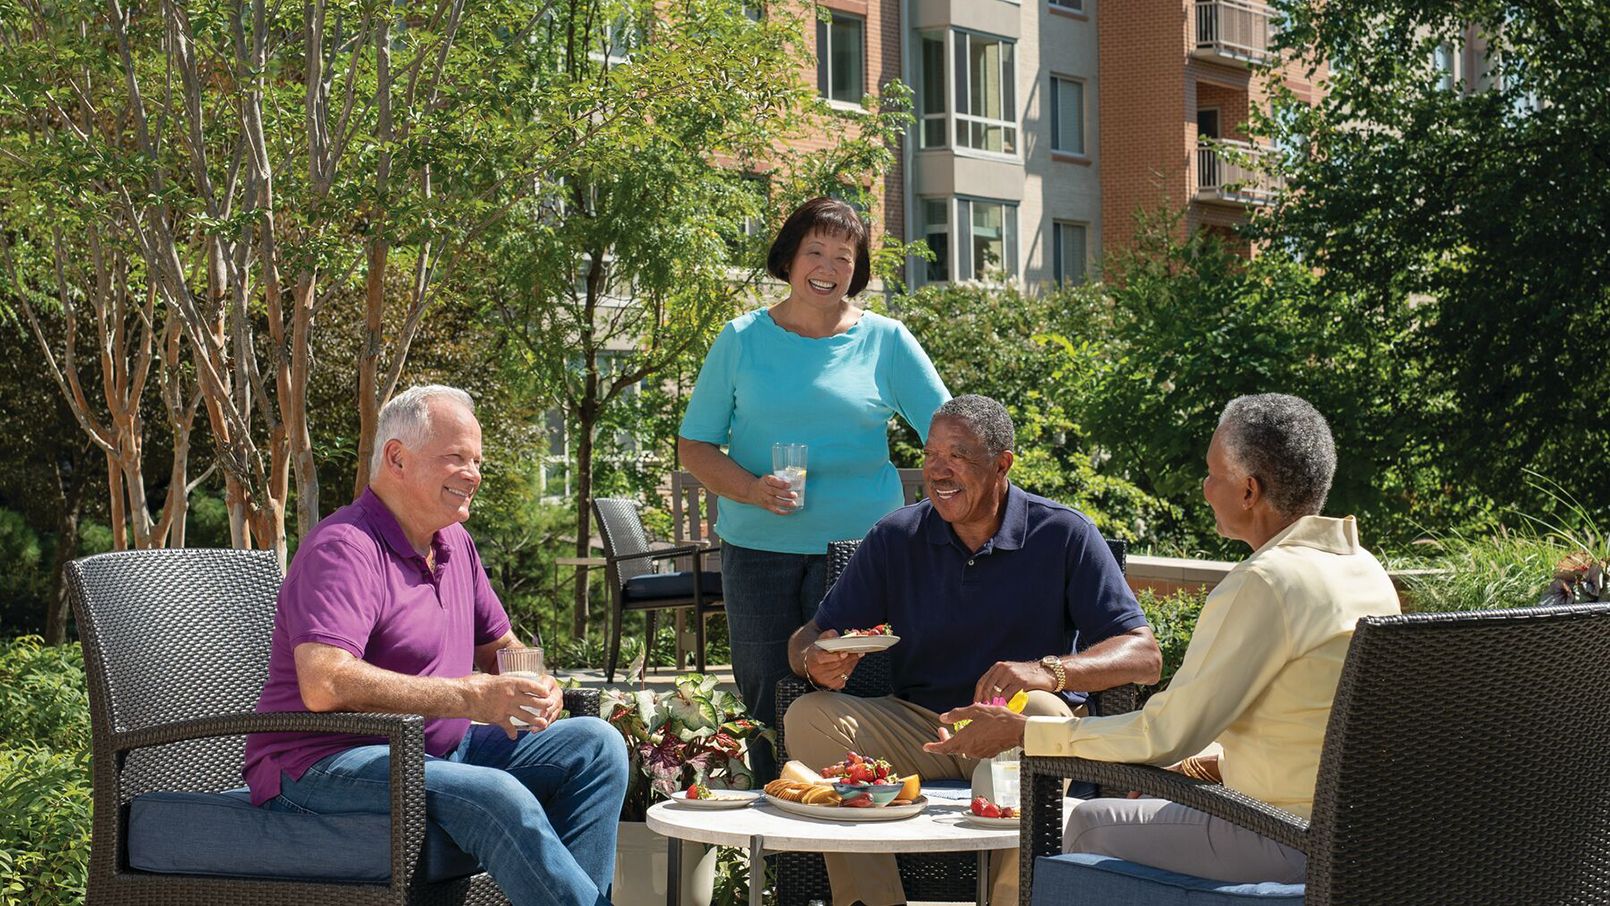 A diverse group of residents gather outside talking and laughing in an Erickson community courtyard.